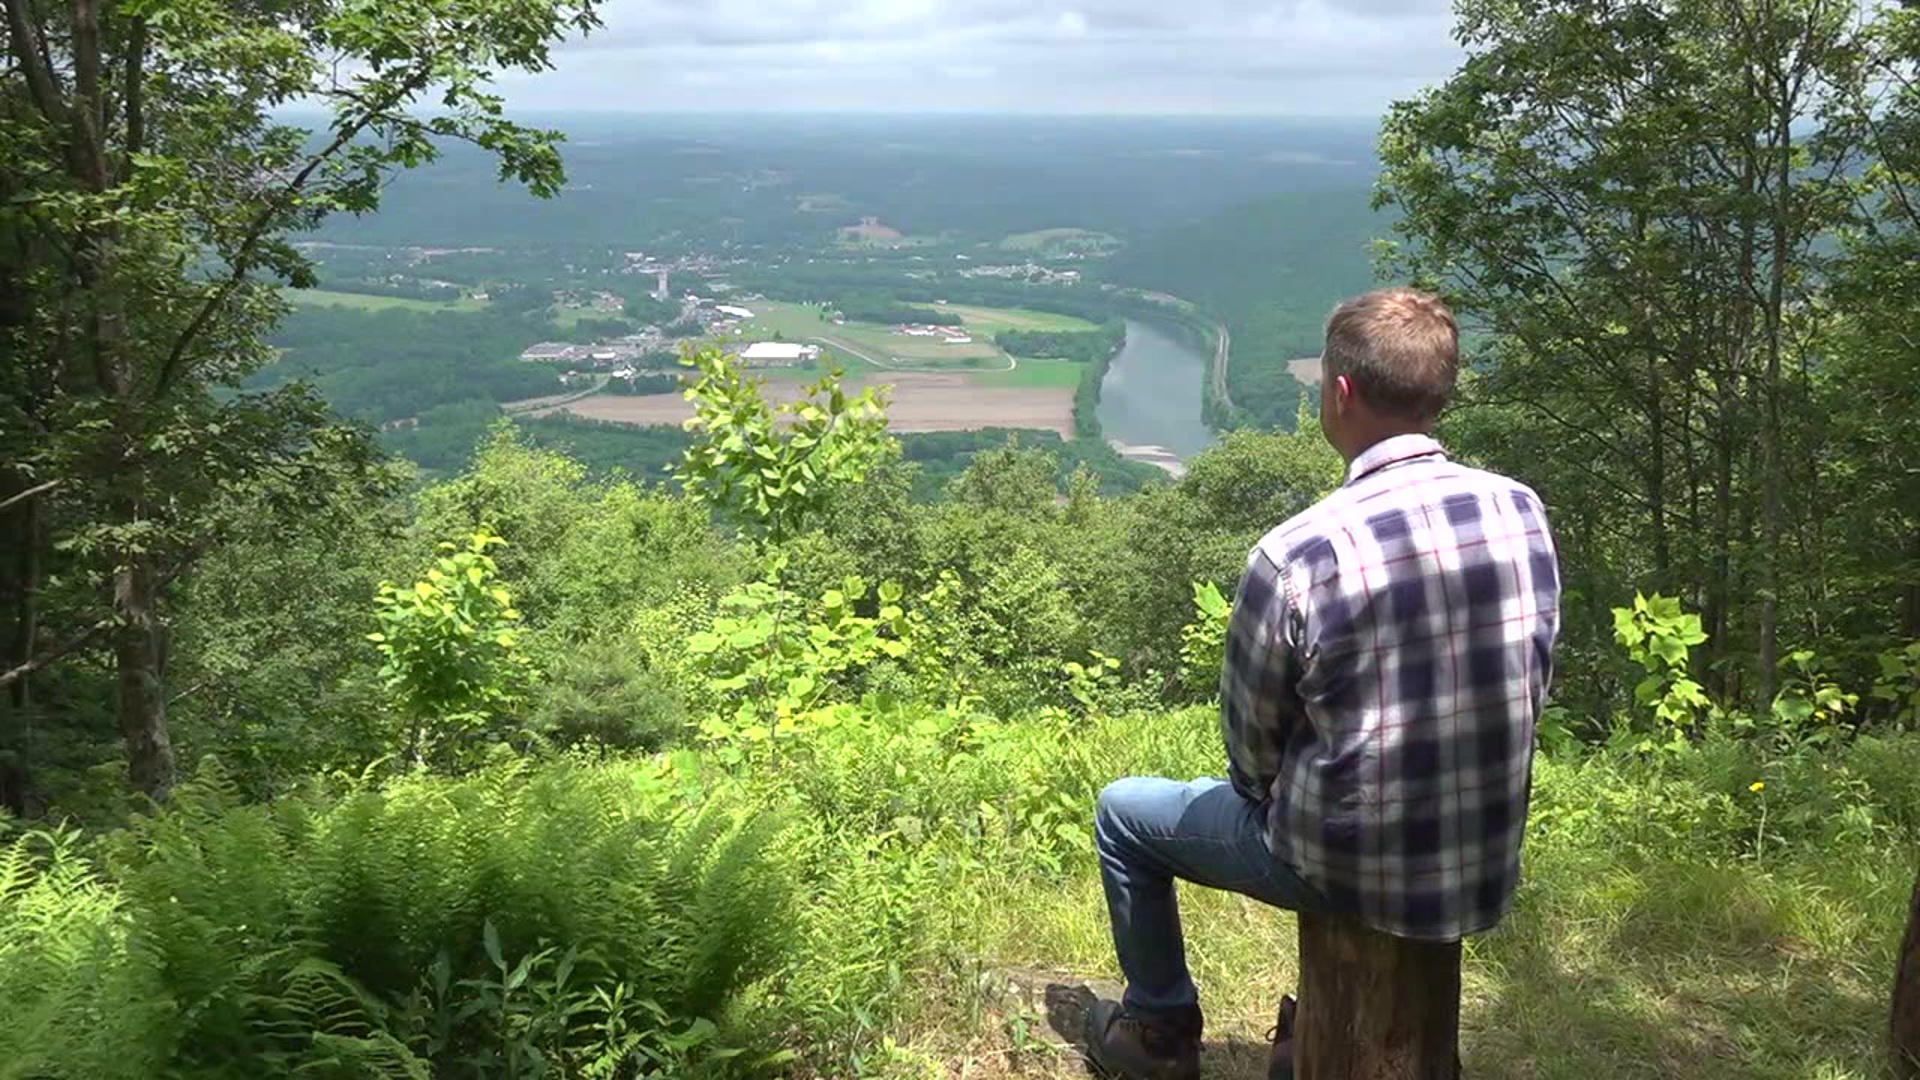 Jon Meyer says it's a bit of a challenge but the views from the top of Miller Mountain are worth the climb.